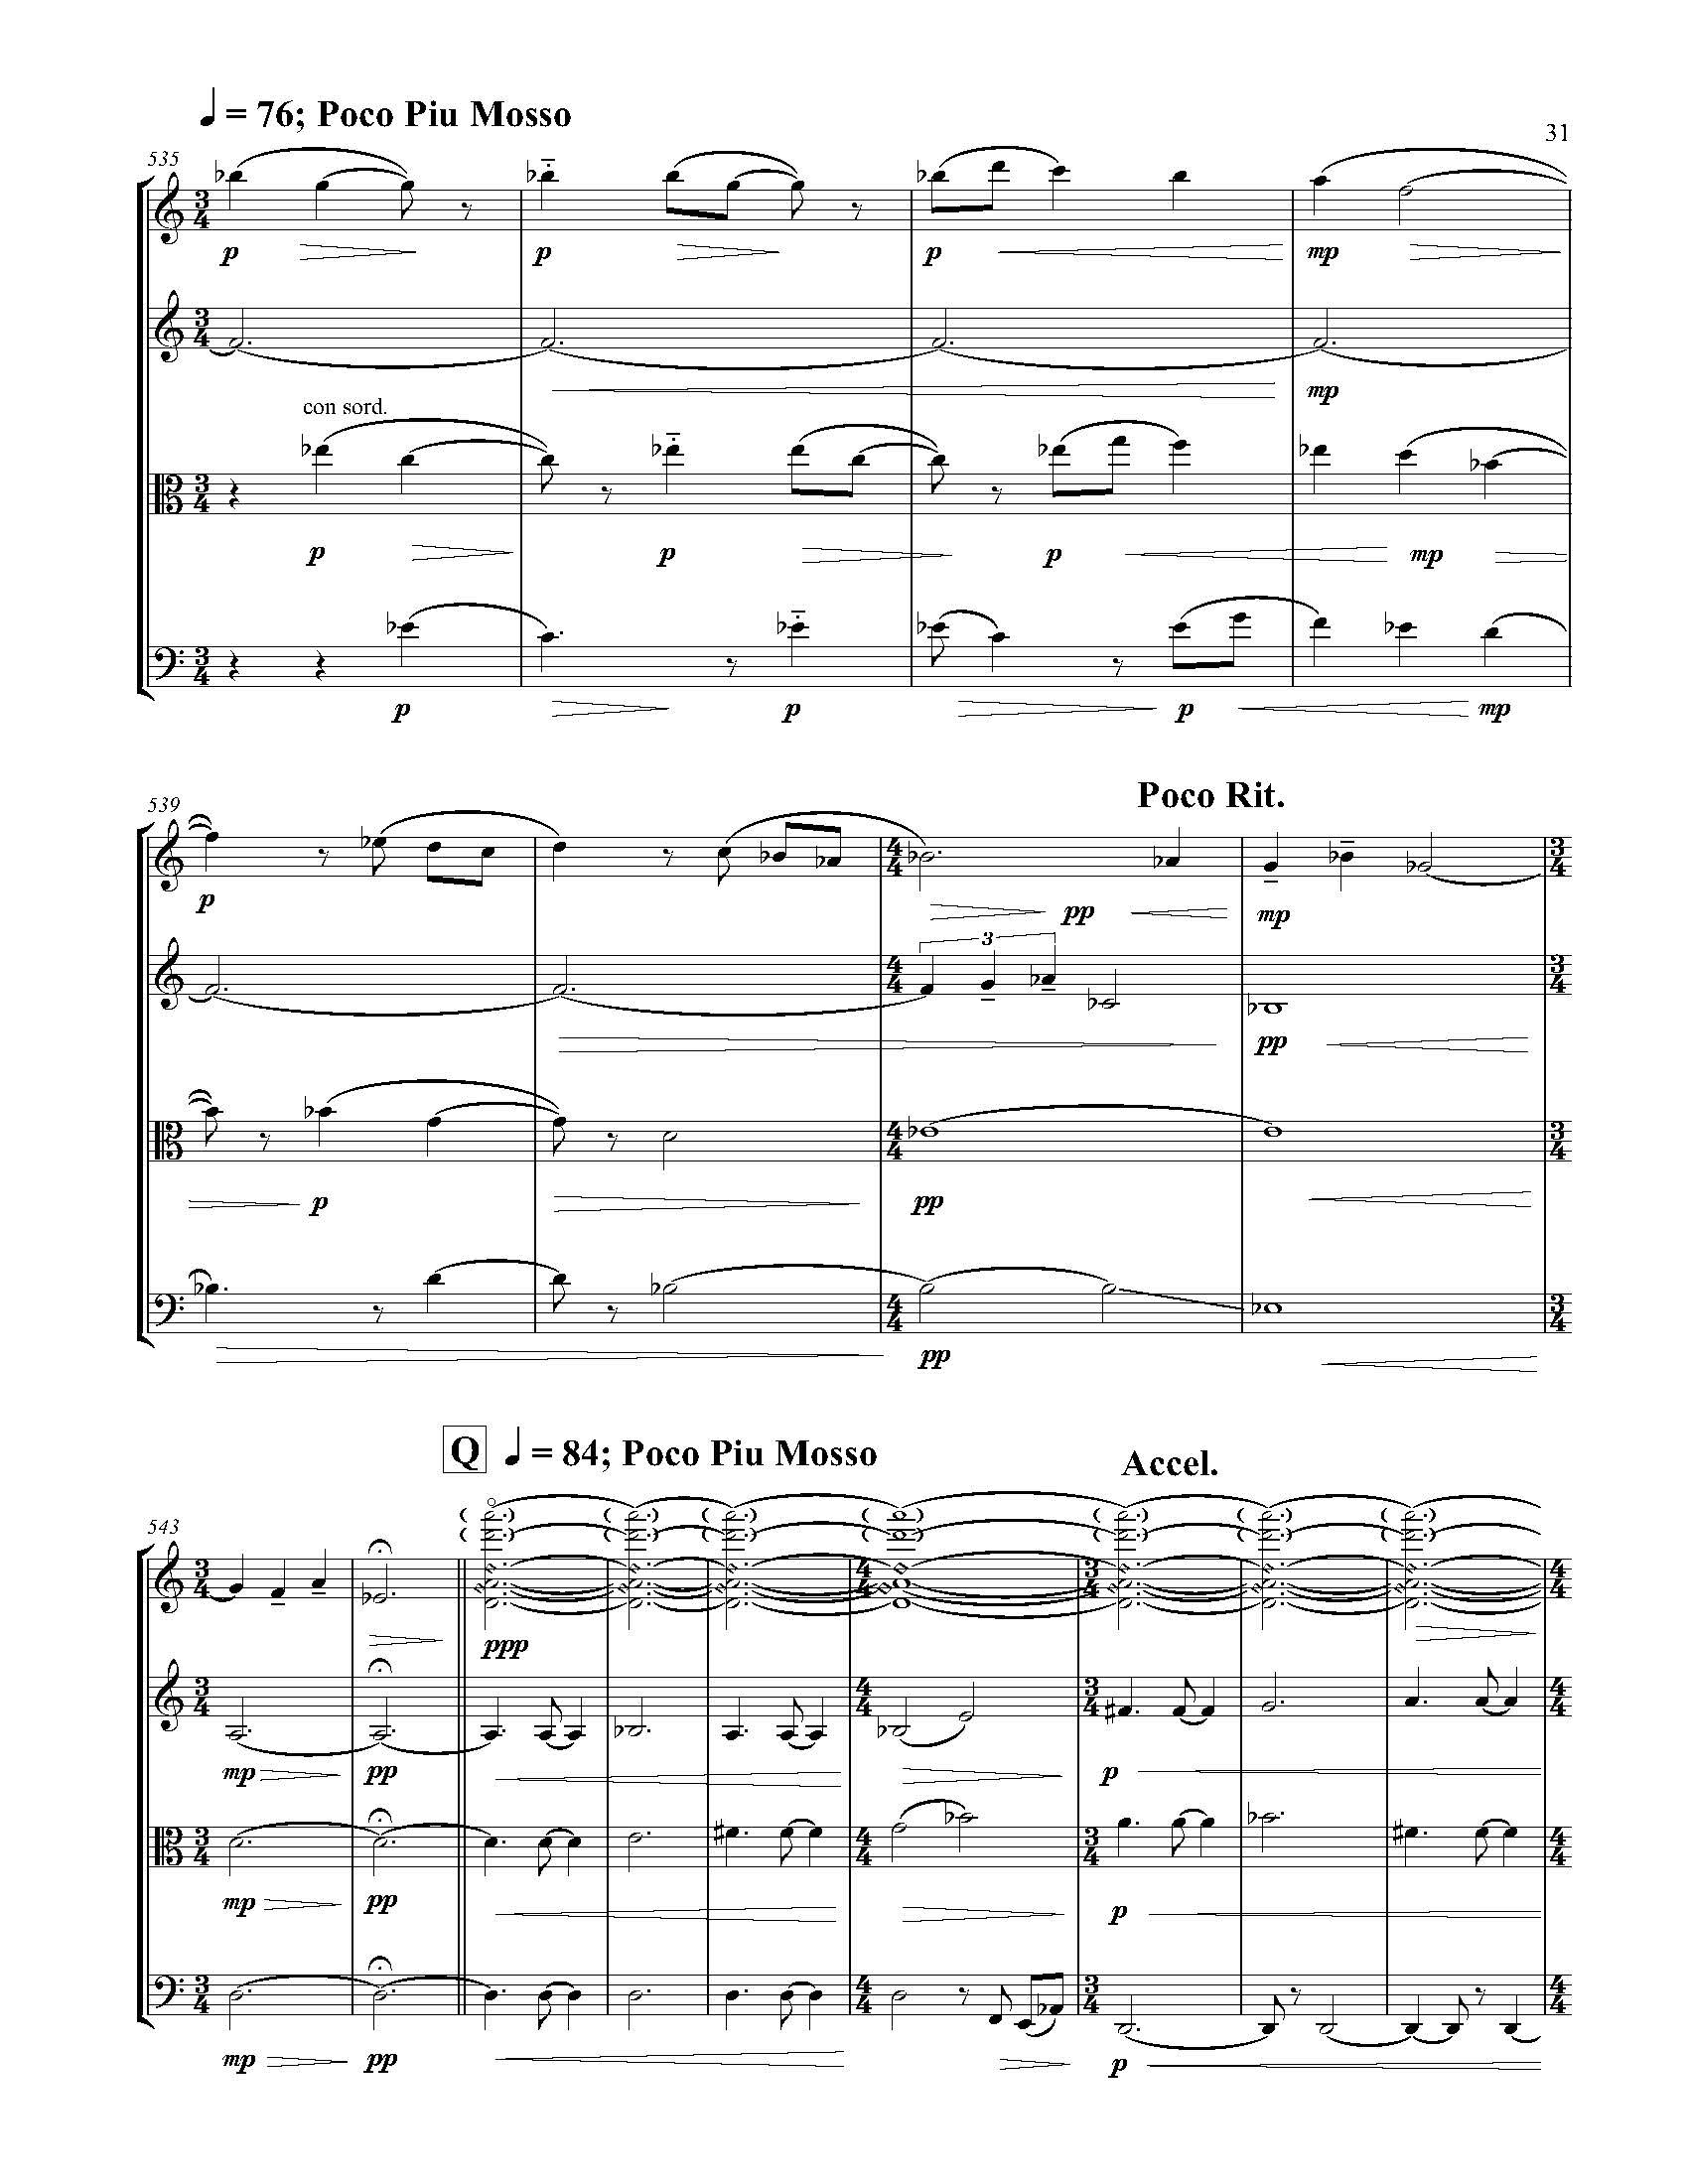 A Country of Vast Designs - Complete Score_Page_37.jpg